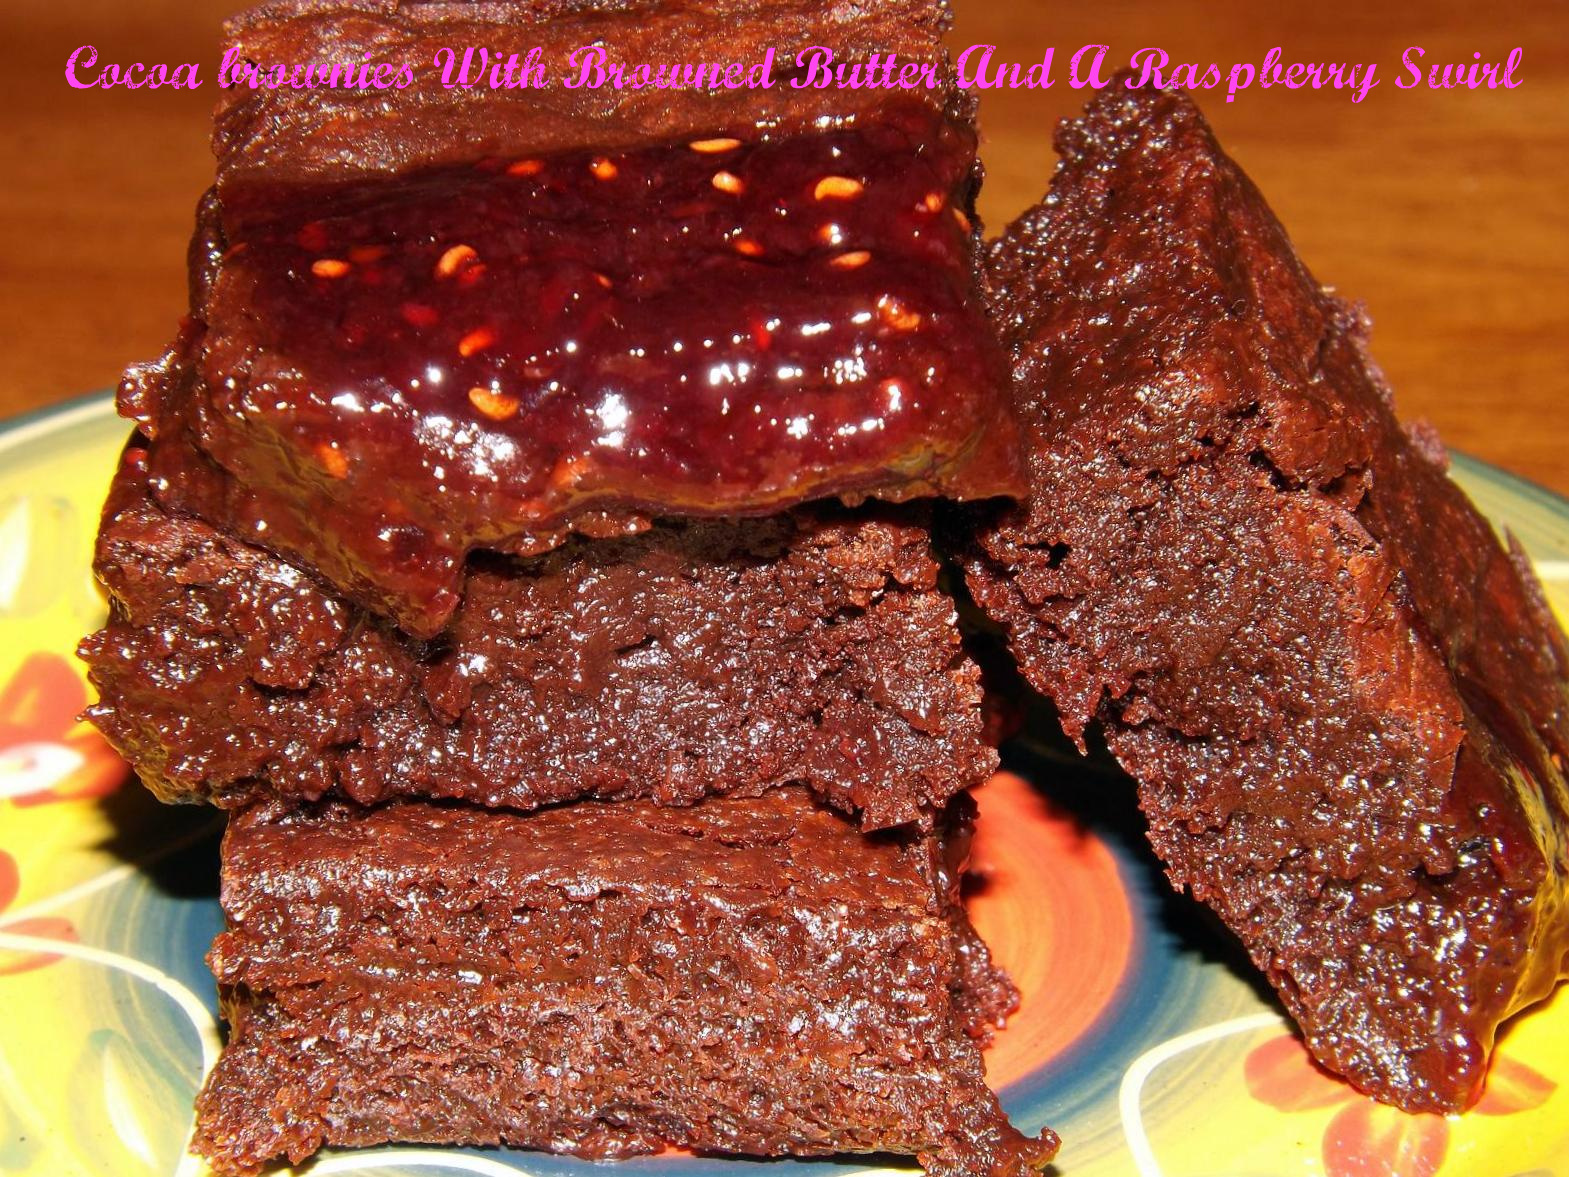 Cocoa Brownies With Browned Butter And A Raspberry Swirl